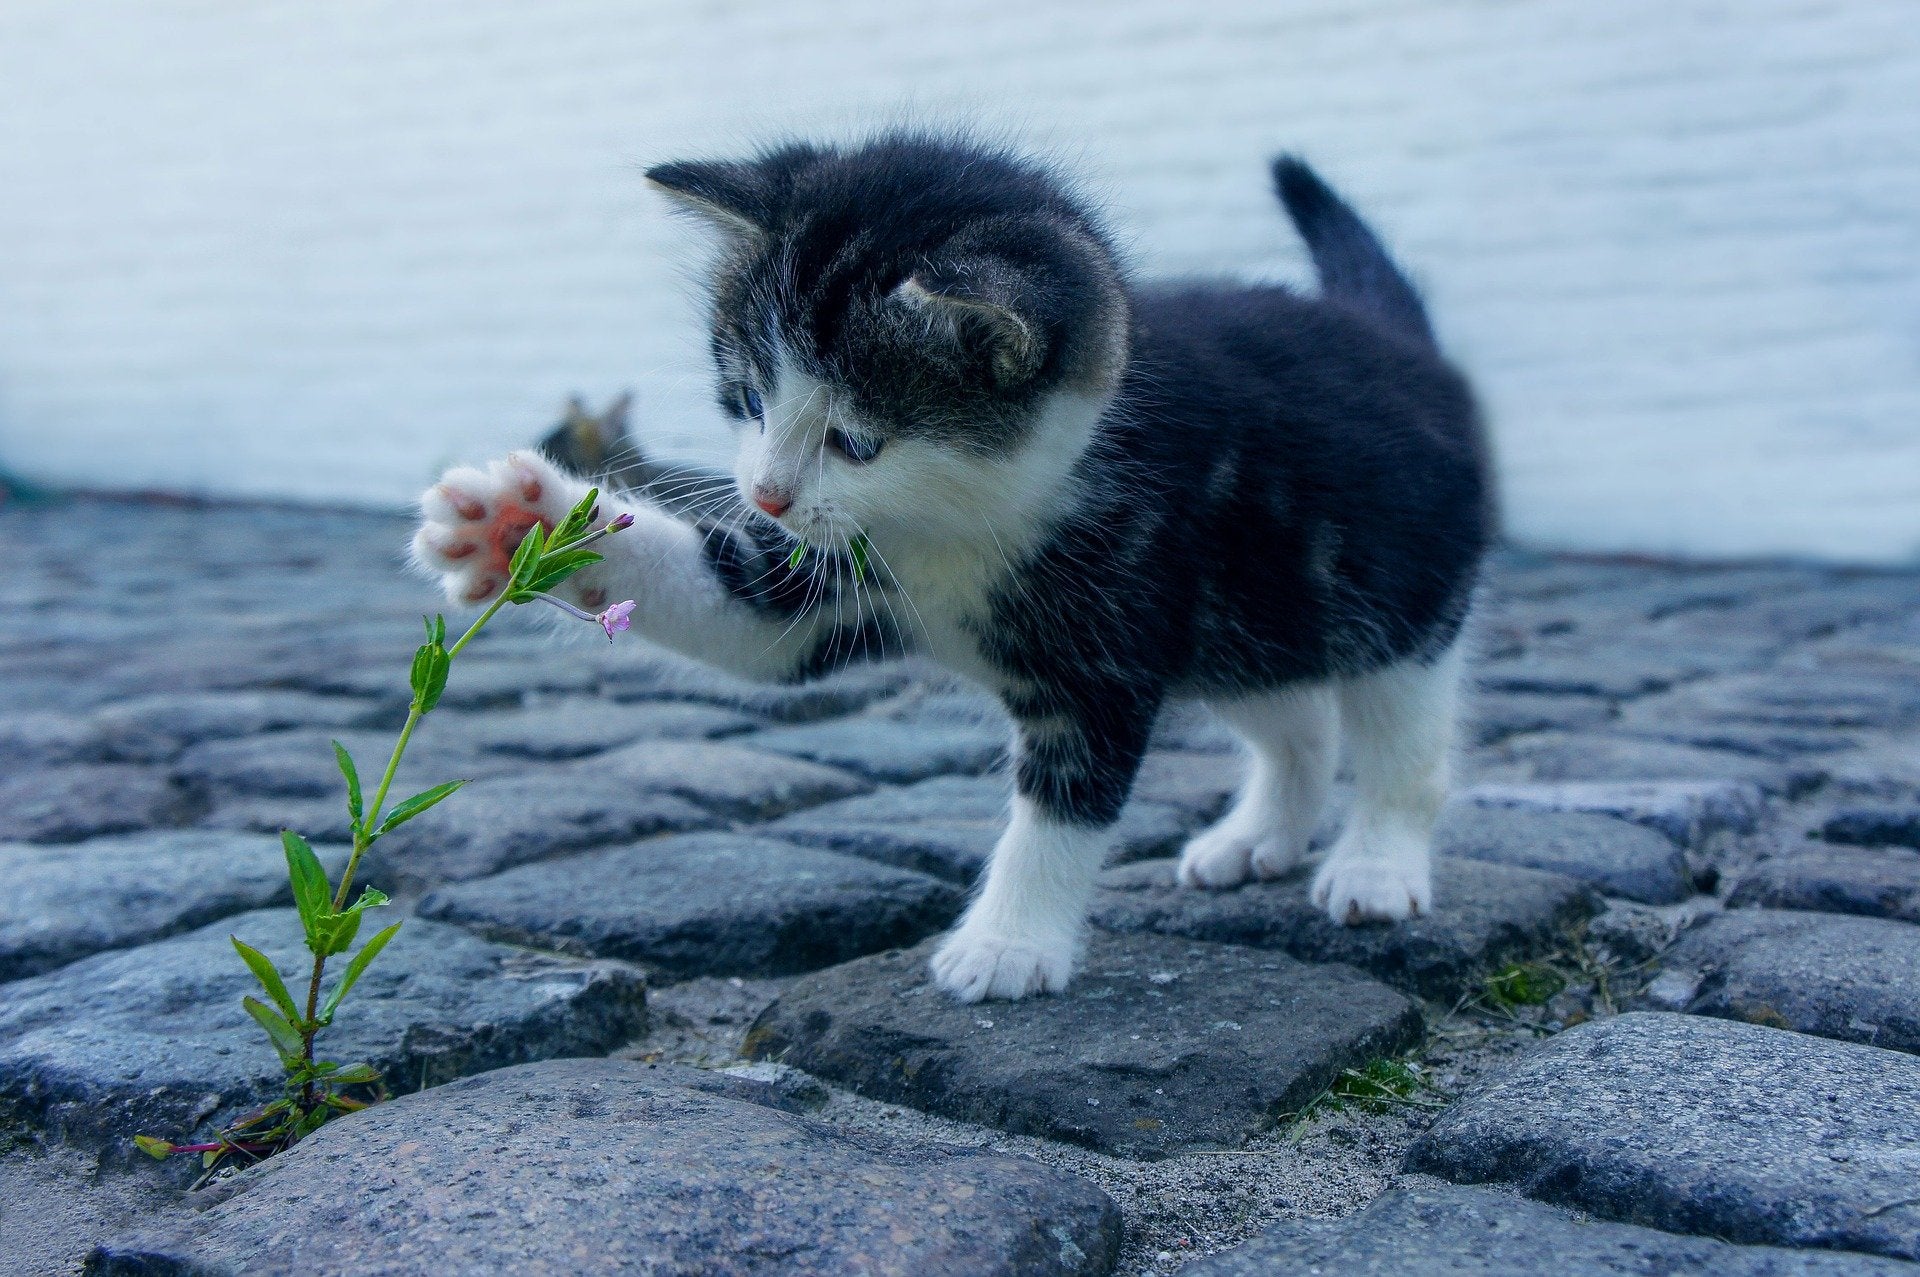 Kitty playing with a flower that popped out of concrete